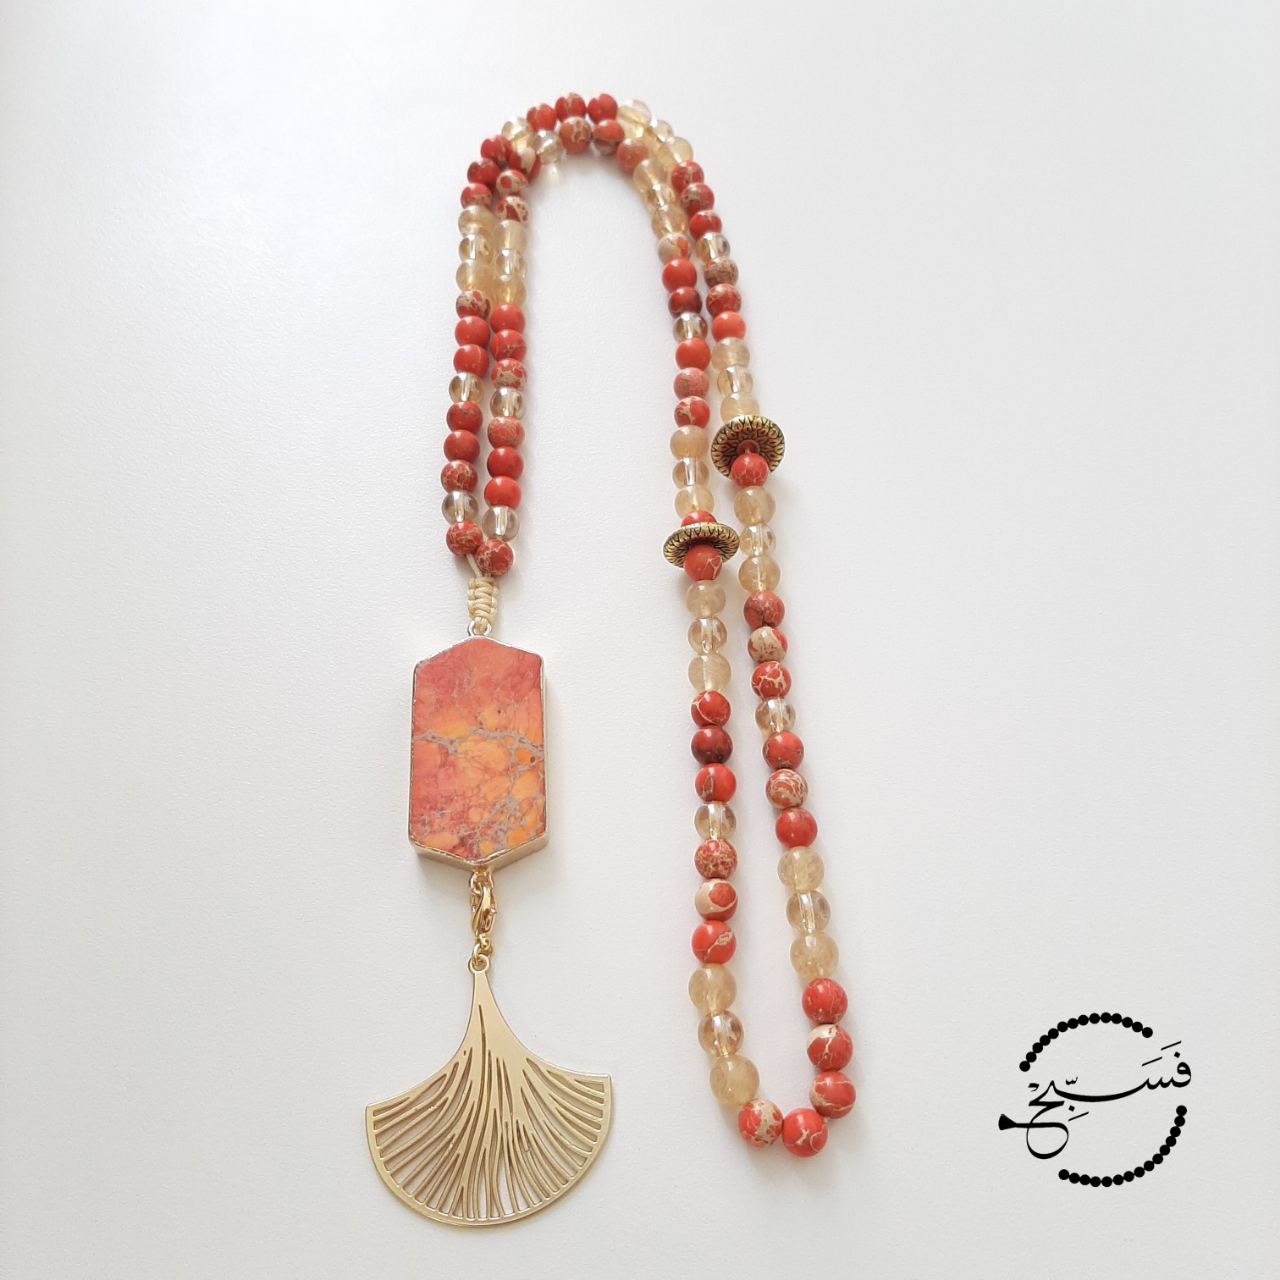 Orange sea sediment beads and pendant.  This unique piece features interchangeable pendants - you can choose between a striking orange tassel or a classic gold fan.  Packaged in a luxurious pouch and a gift box.  99 beads